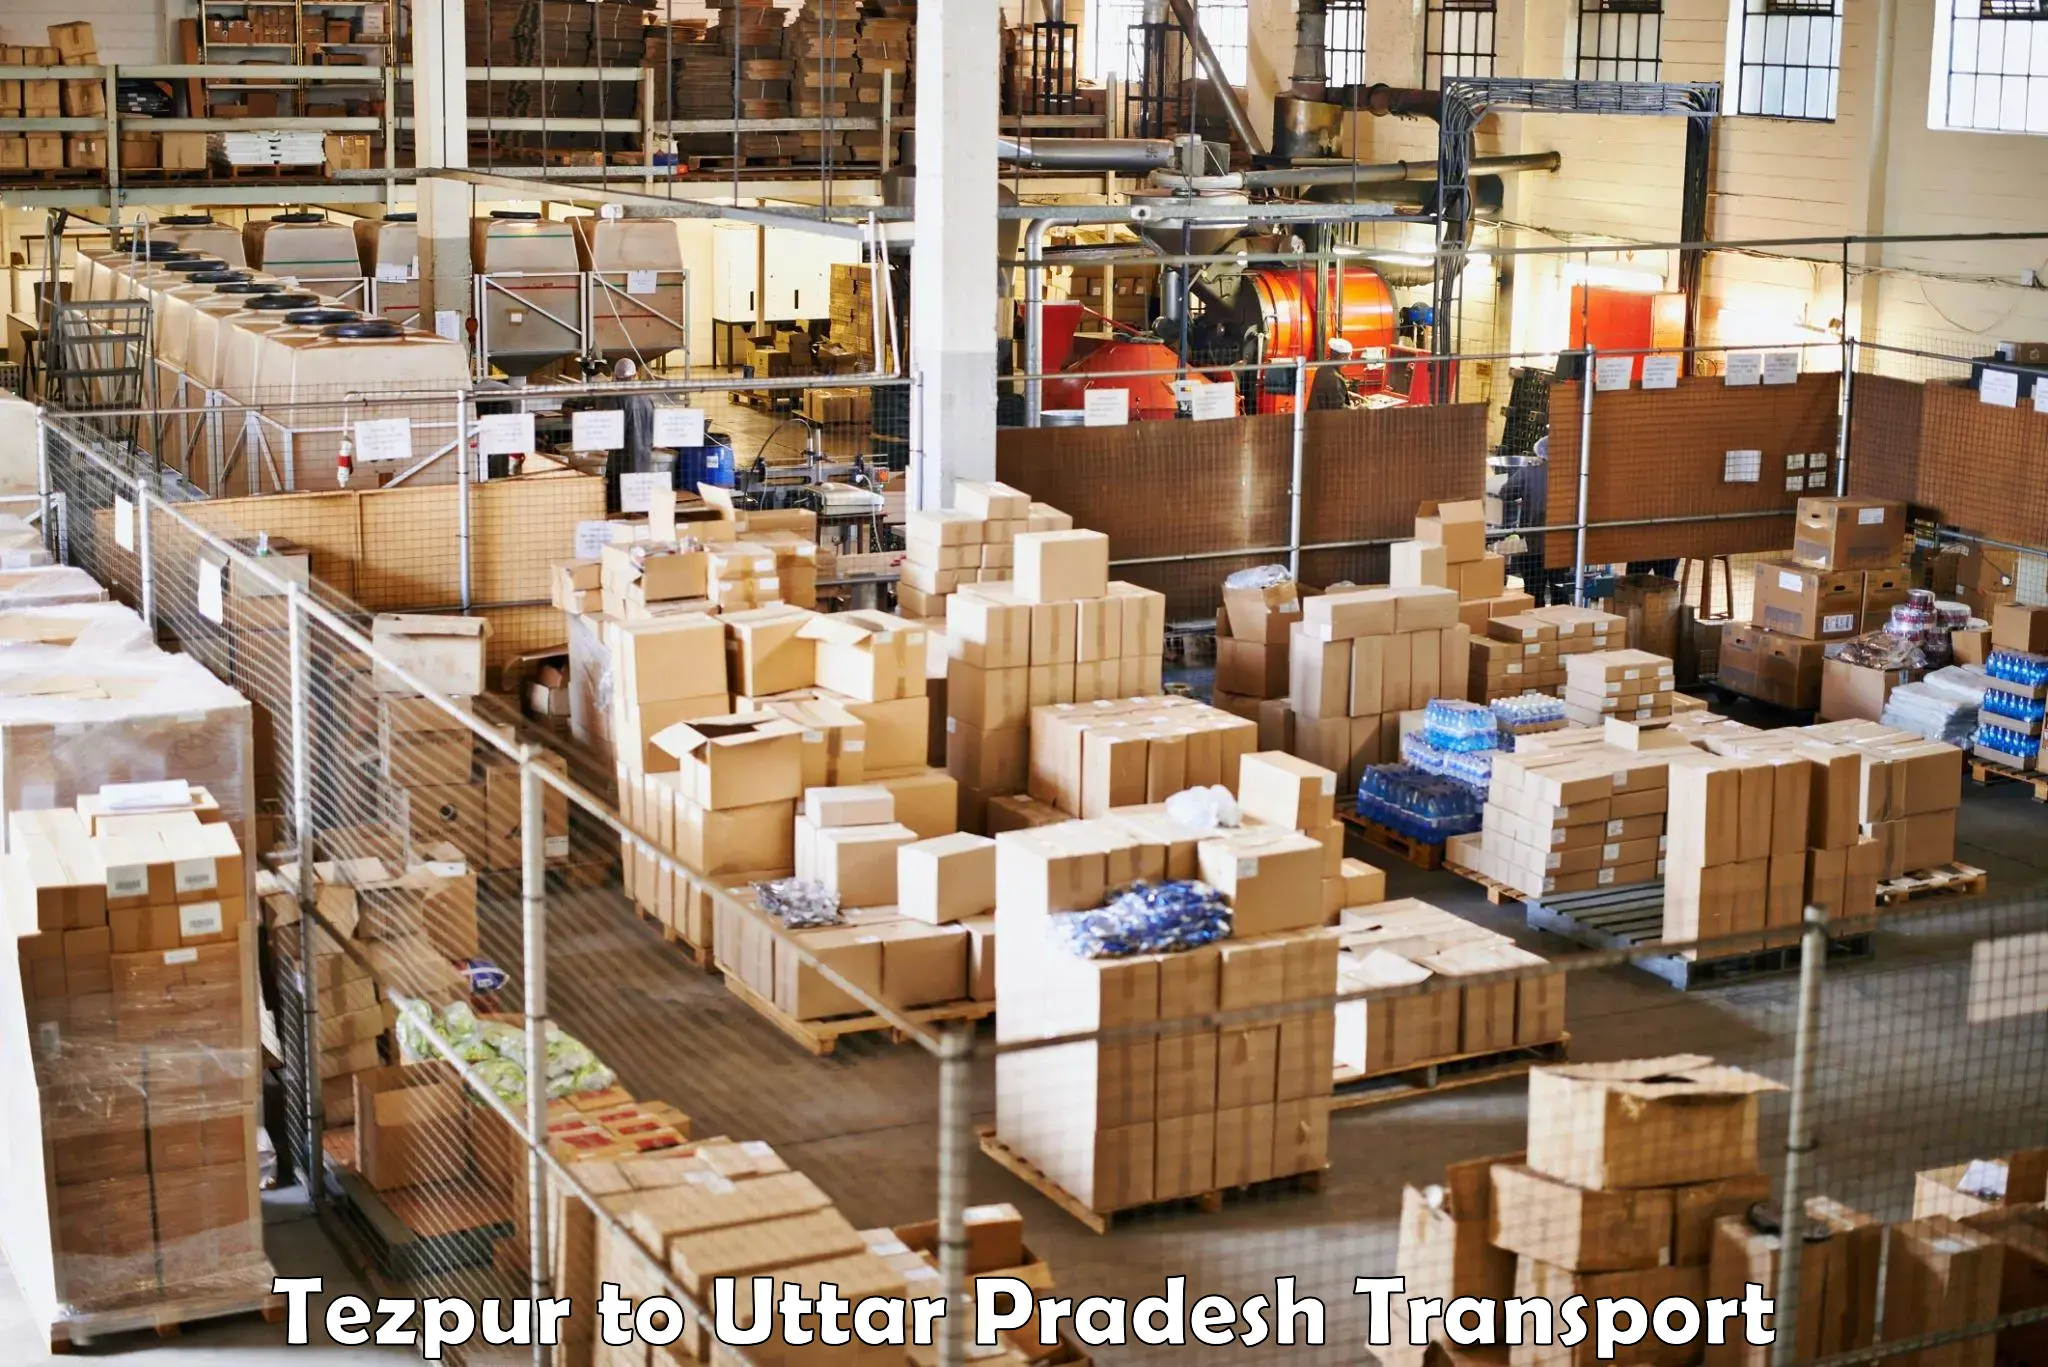 Commercial transport service Tezpur to Mathura